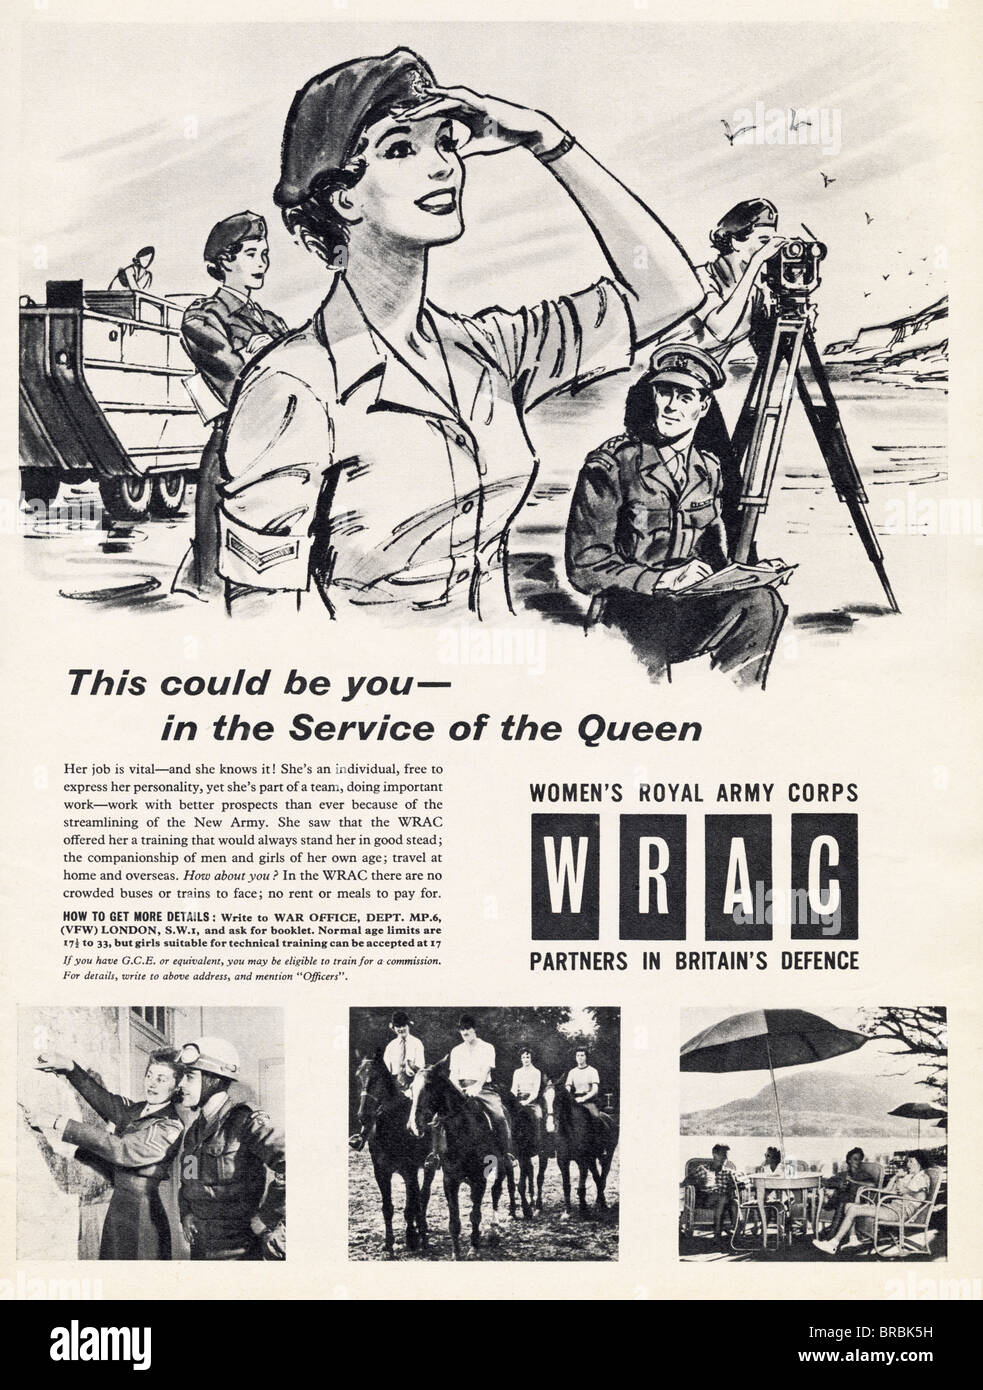 Black and white advert for WRAC Women's Royal Army Corps in fashion magazine circa 1959 Stock Photo